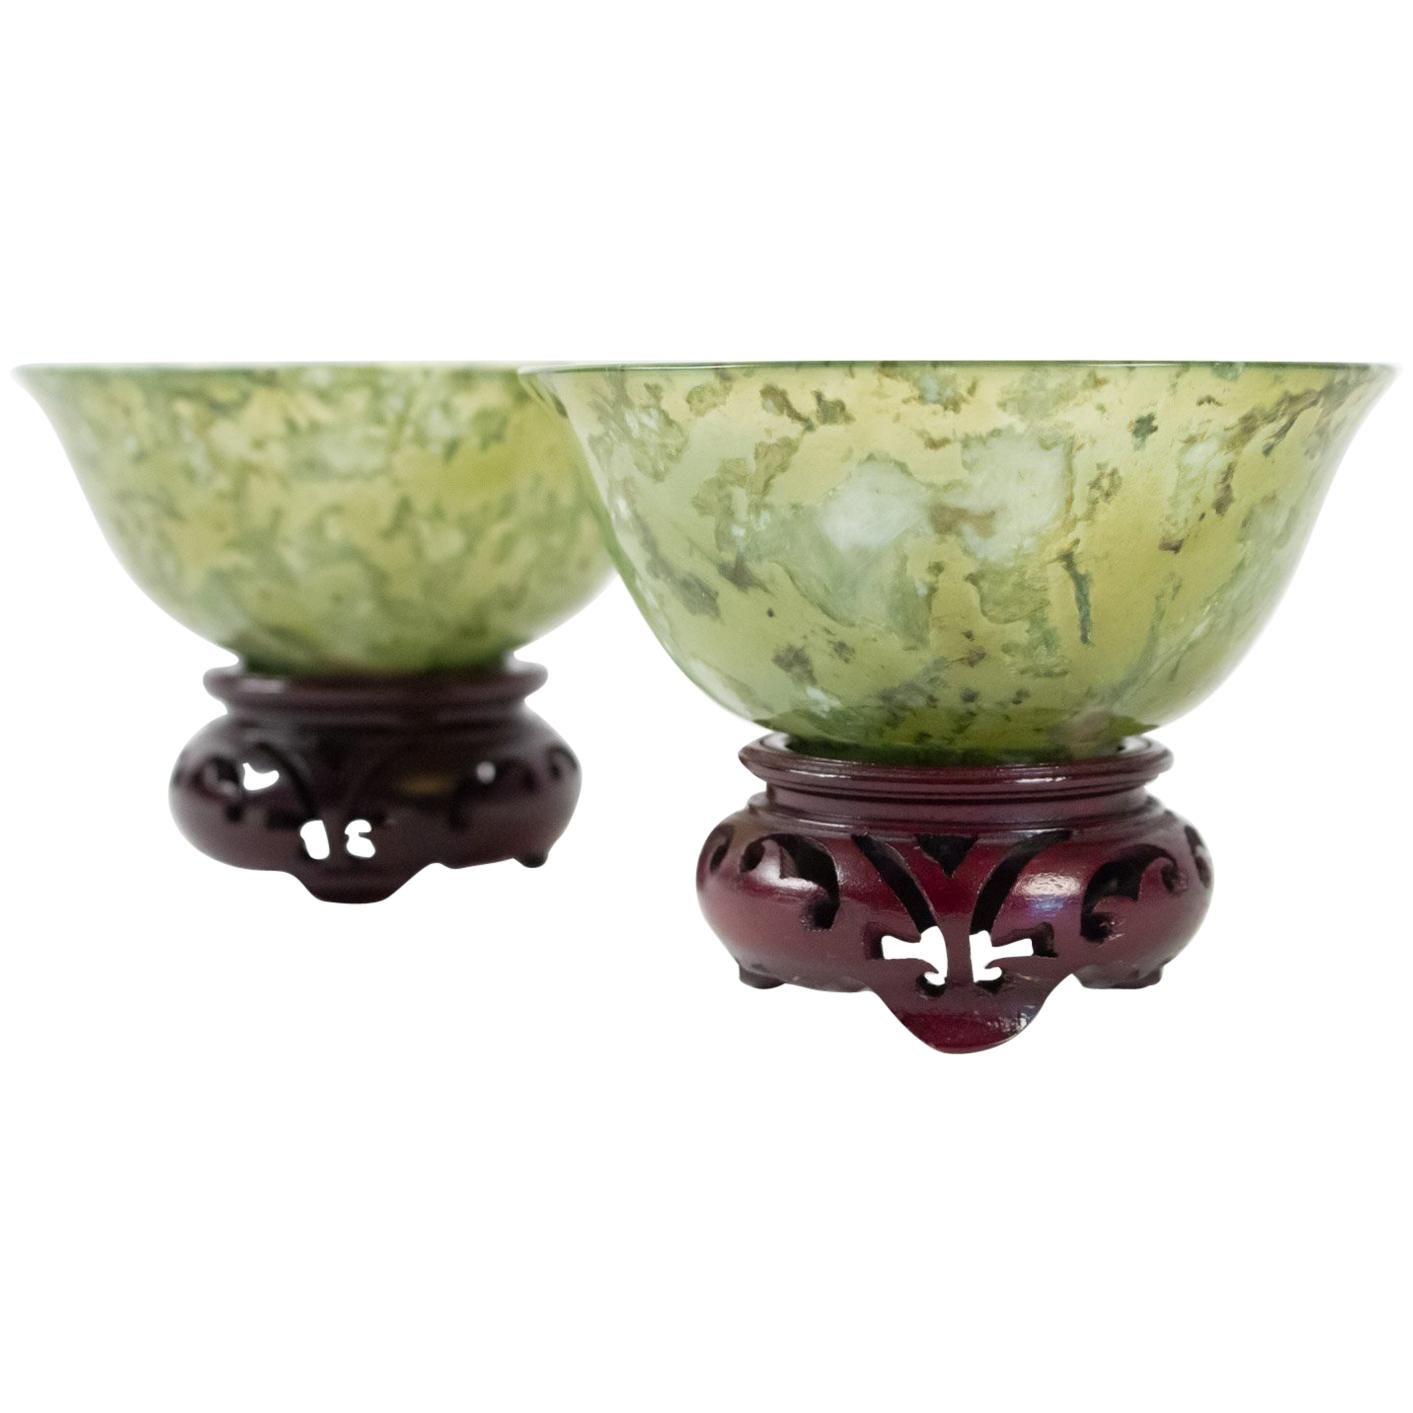 Pair of Bowenite Cups, Asian Art, Antiquity, Mid 20th Century, China